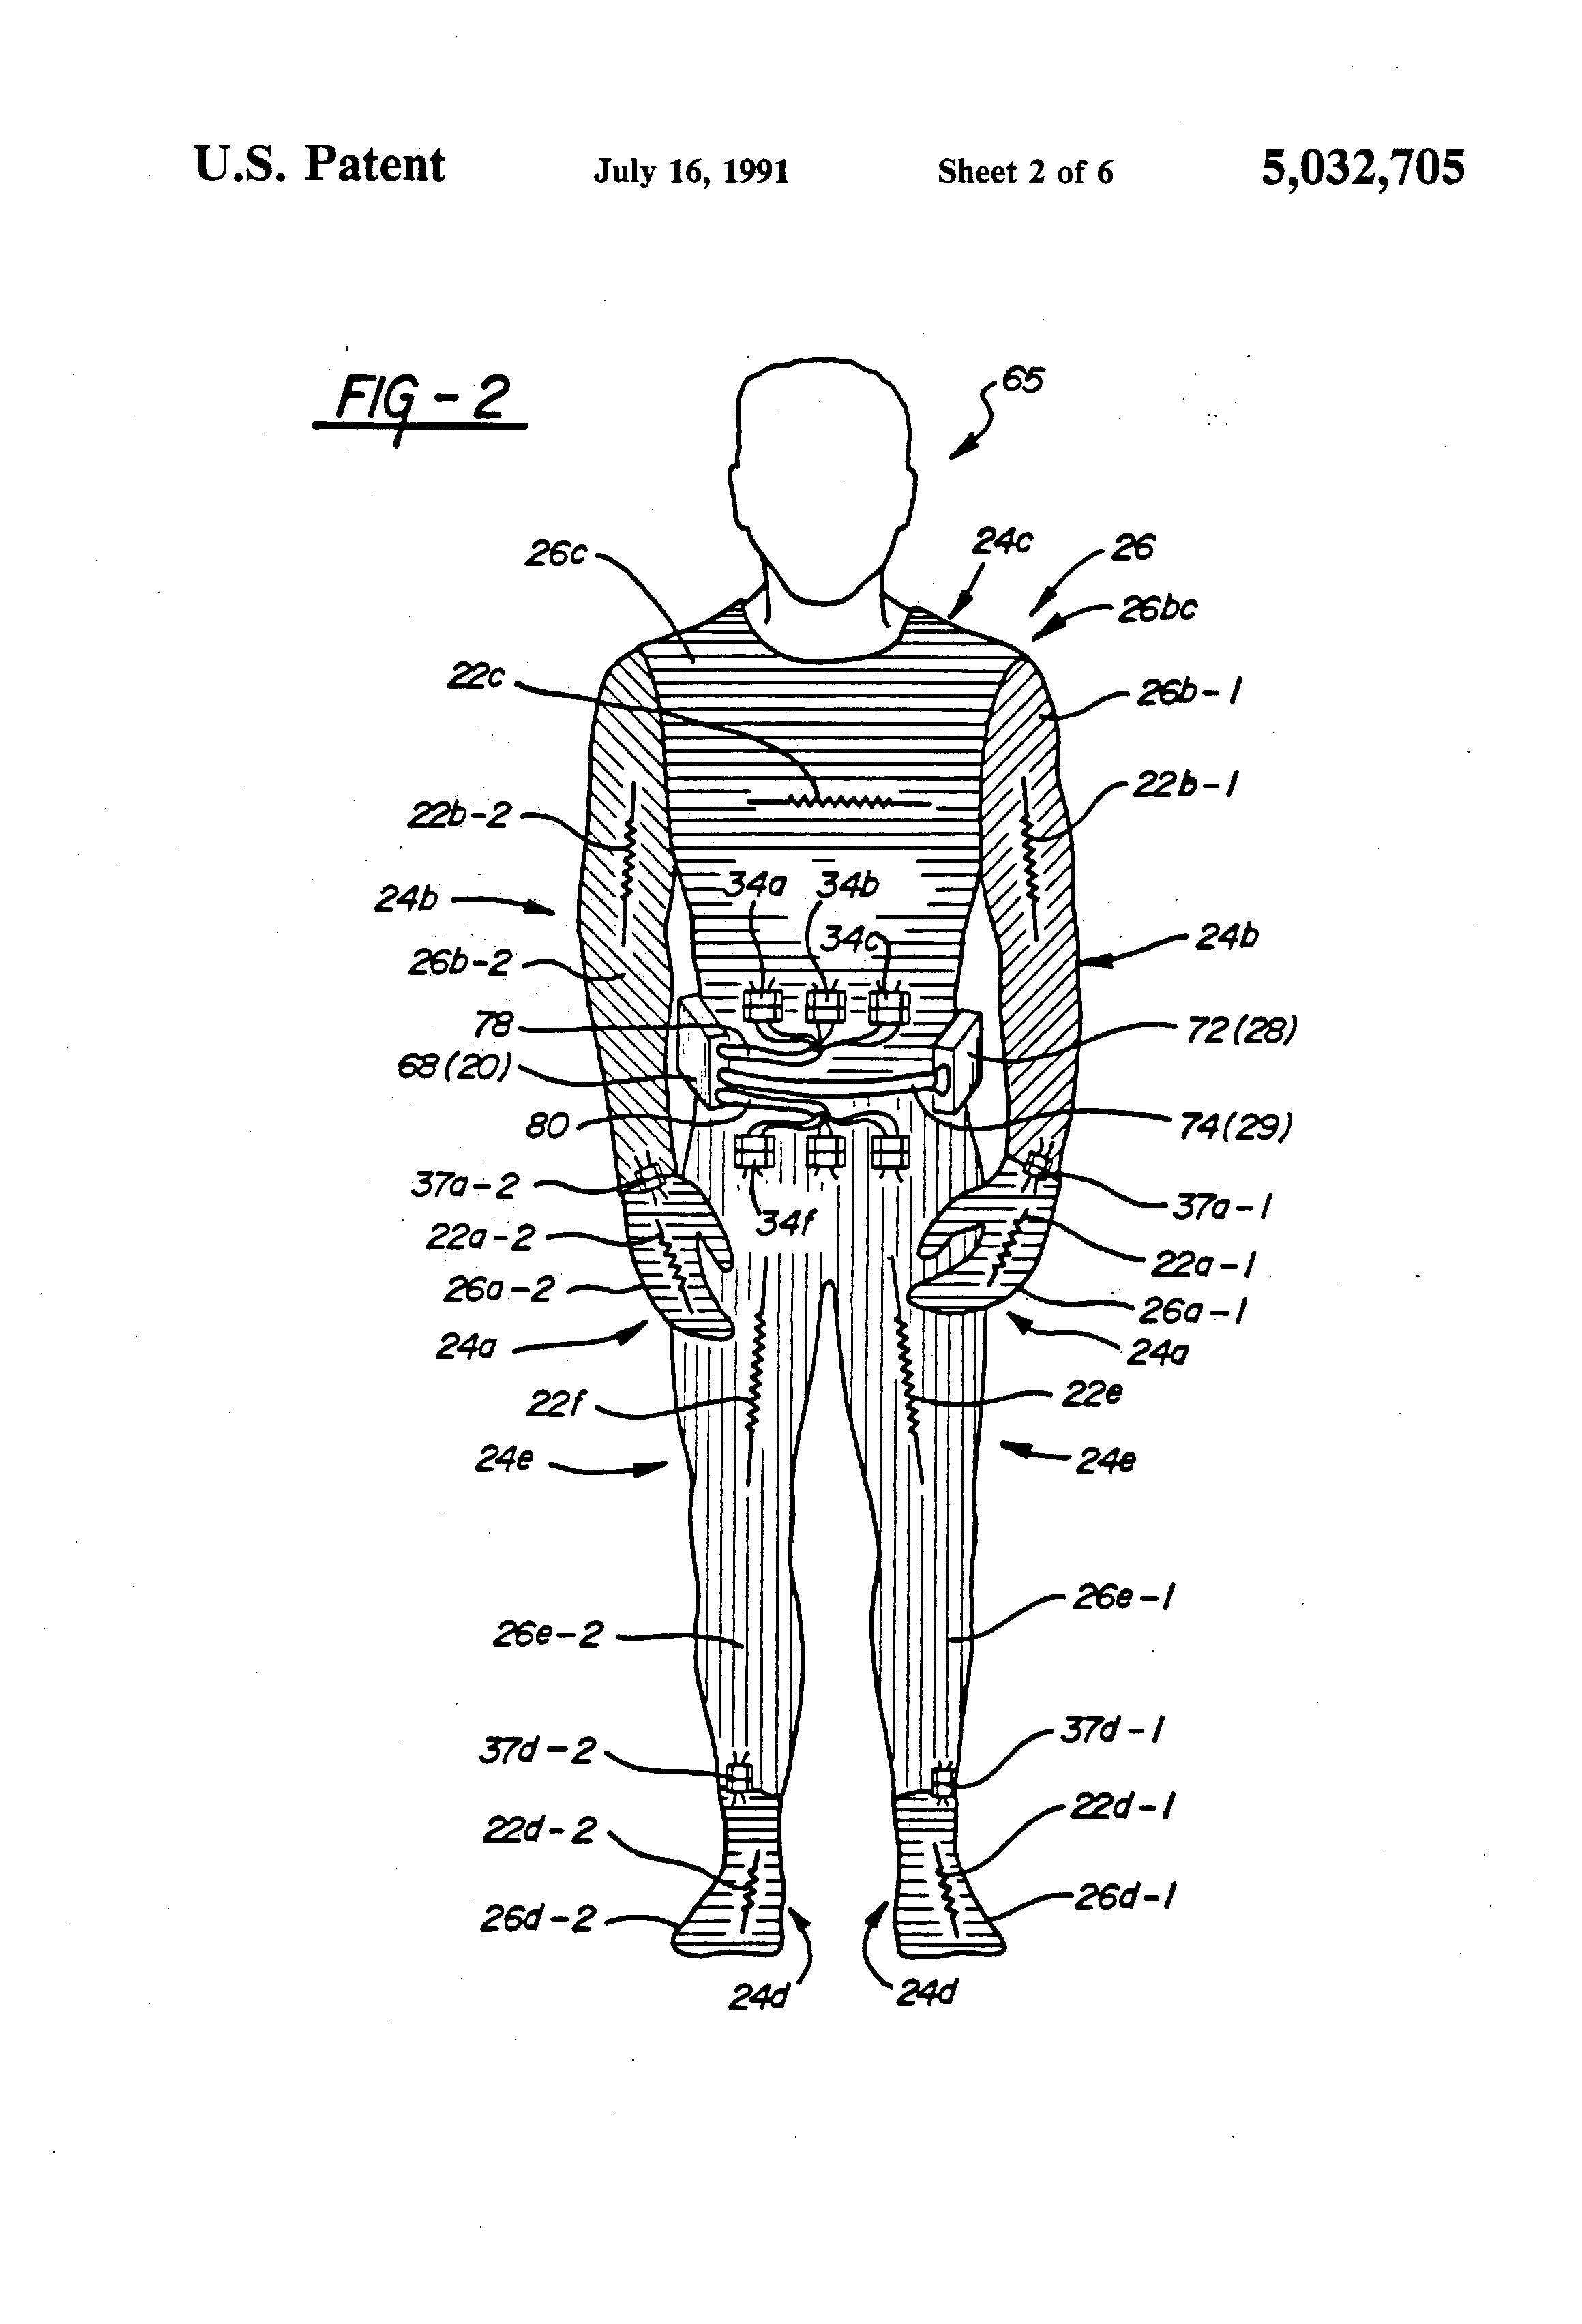 Electrical Heating Garment Patent